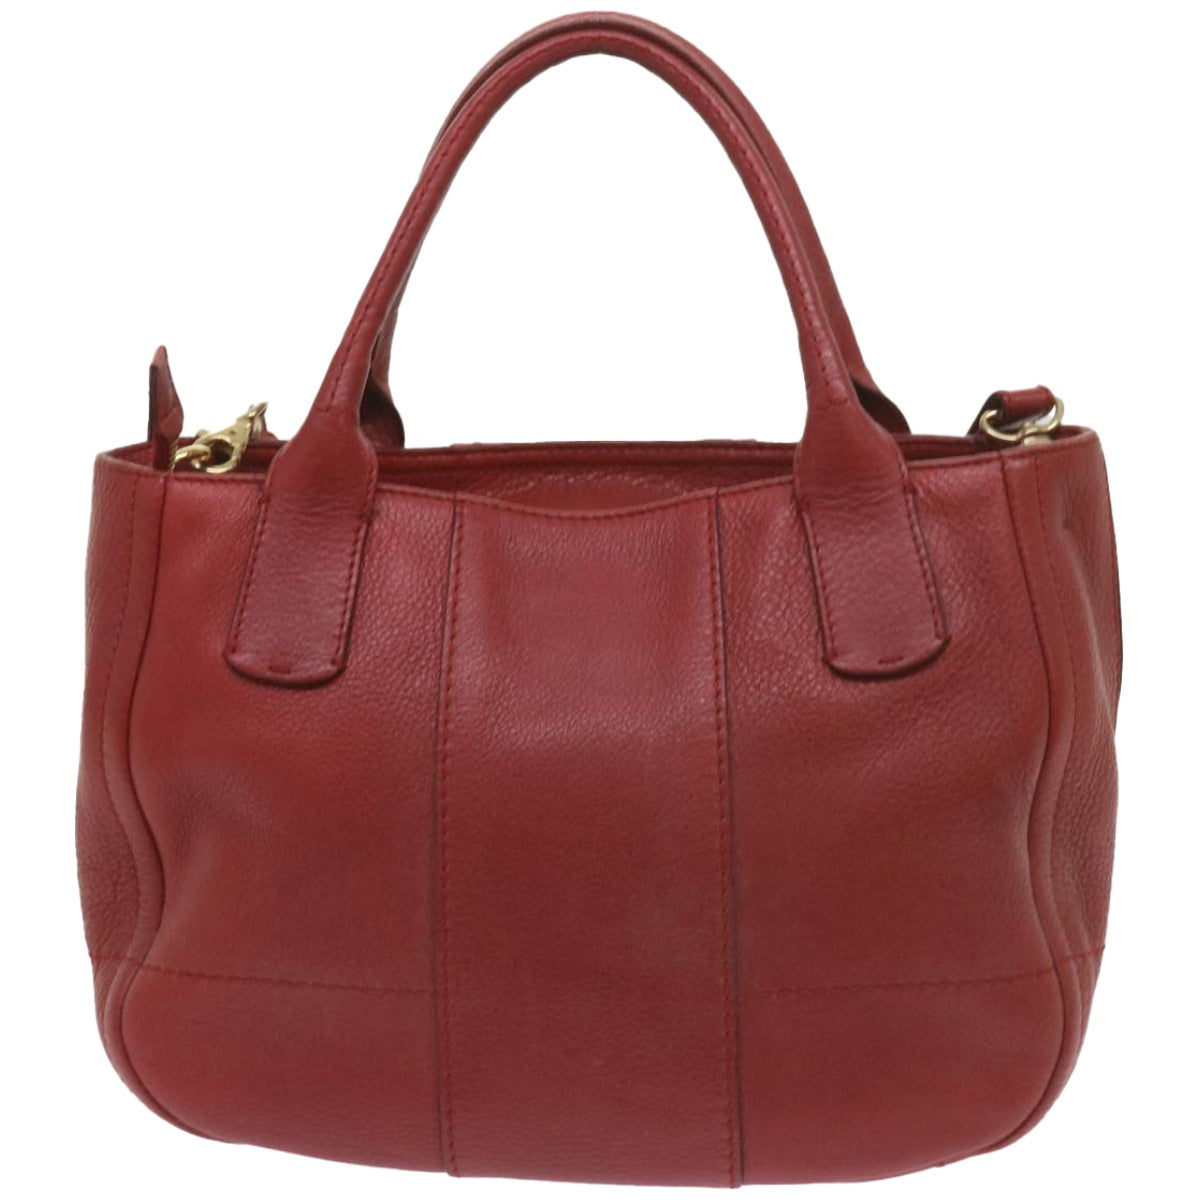 Salvatore Ferragamo Hand Bag Leather 2way Red Auth bs12366 - 0